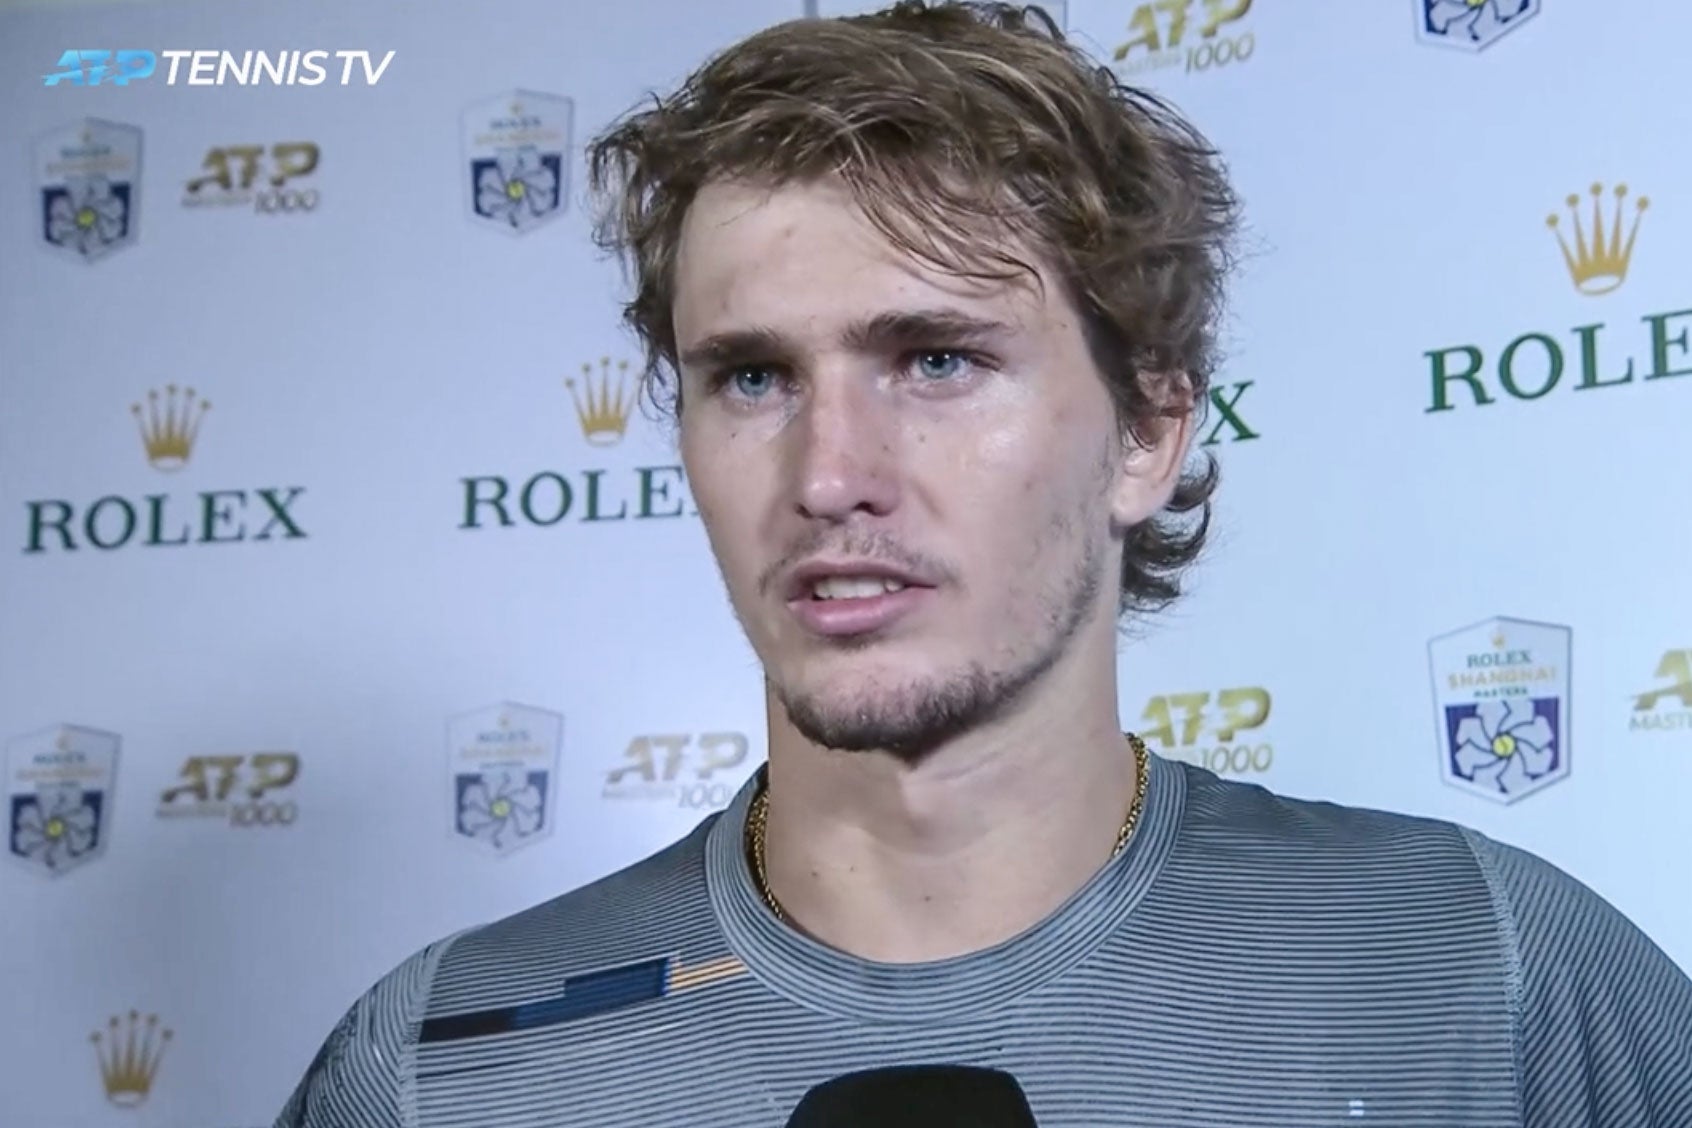 Zverev with no markings on his neck